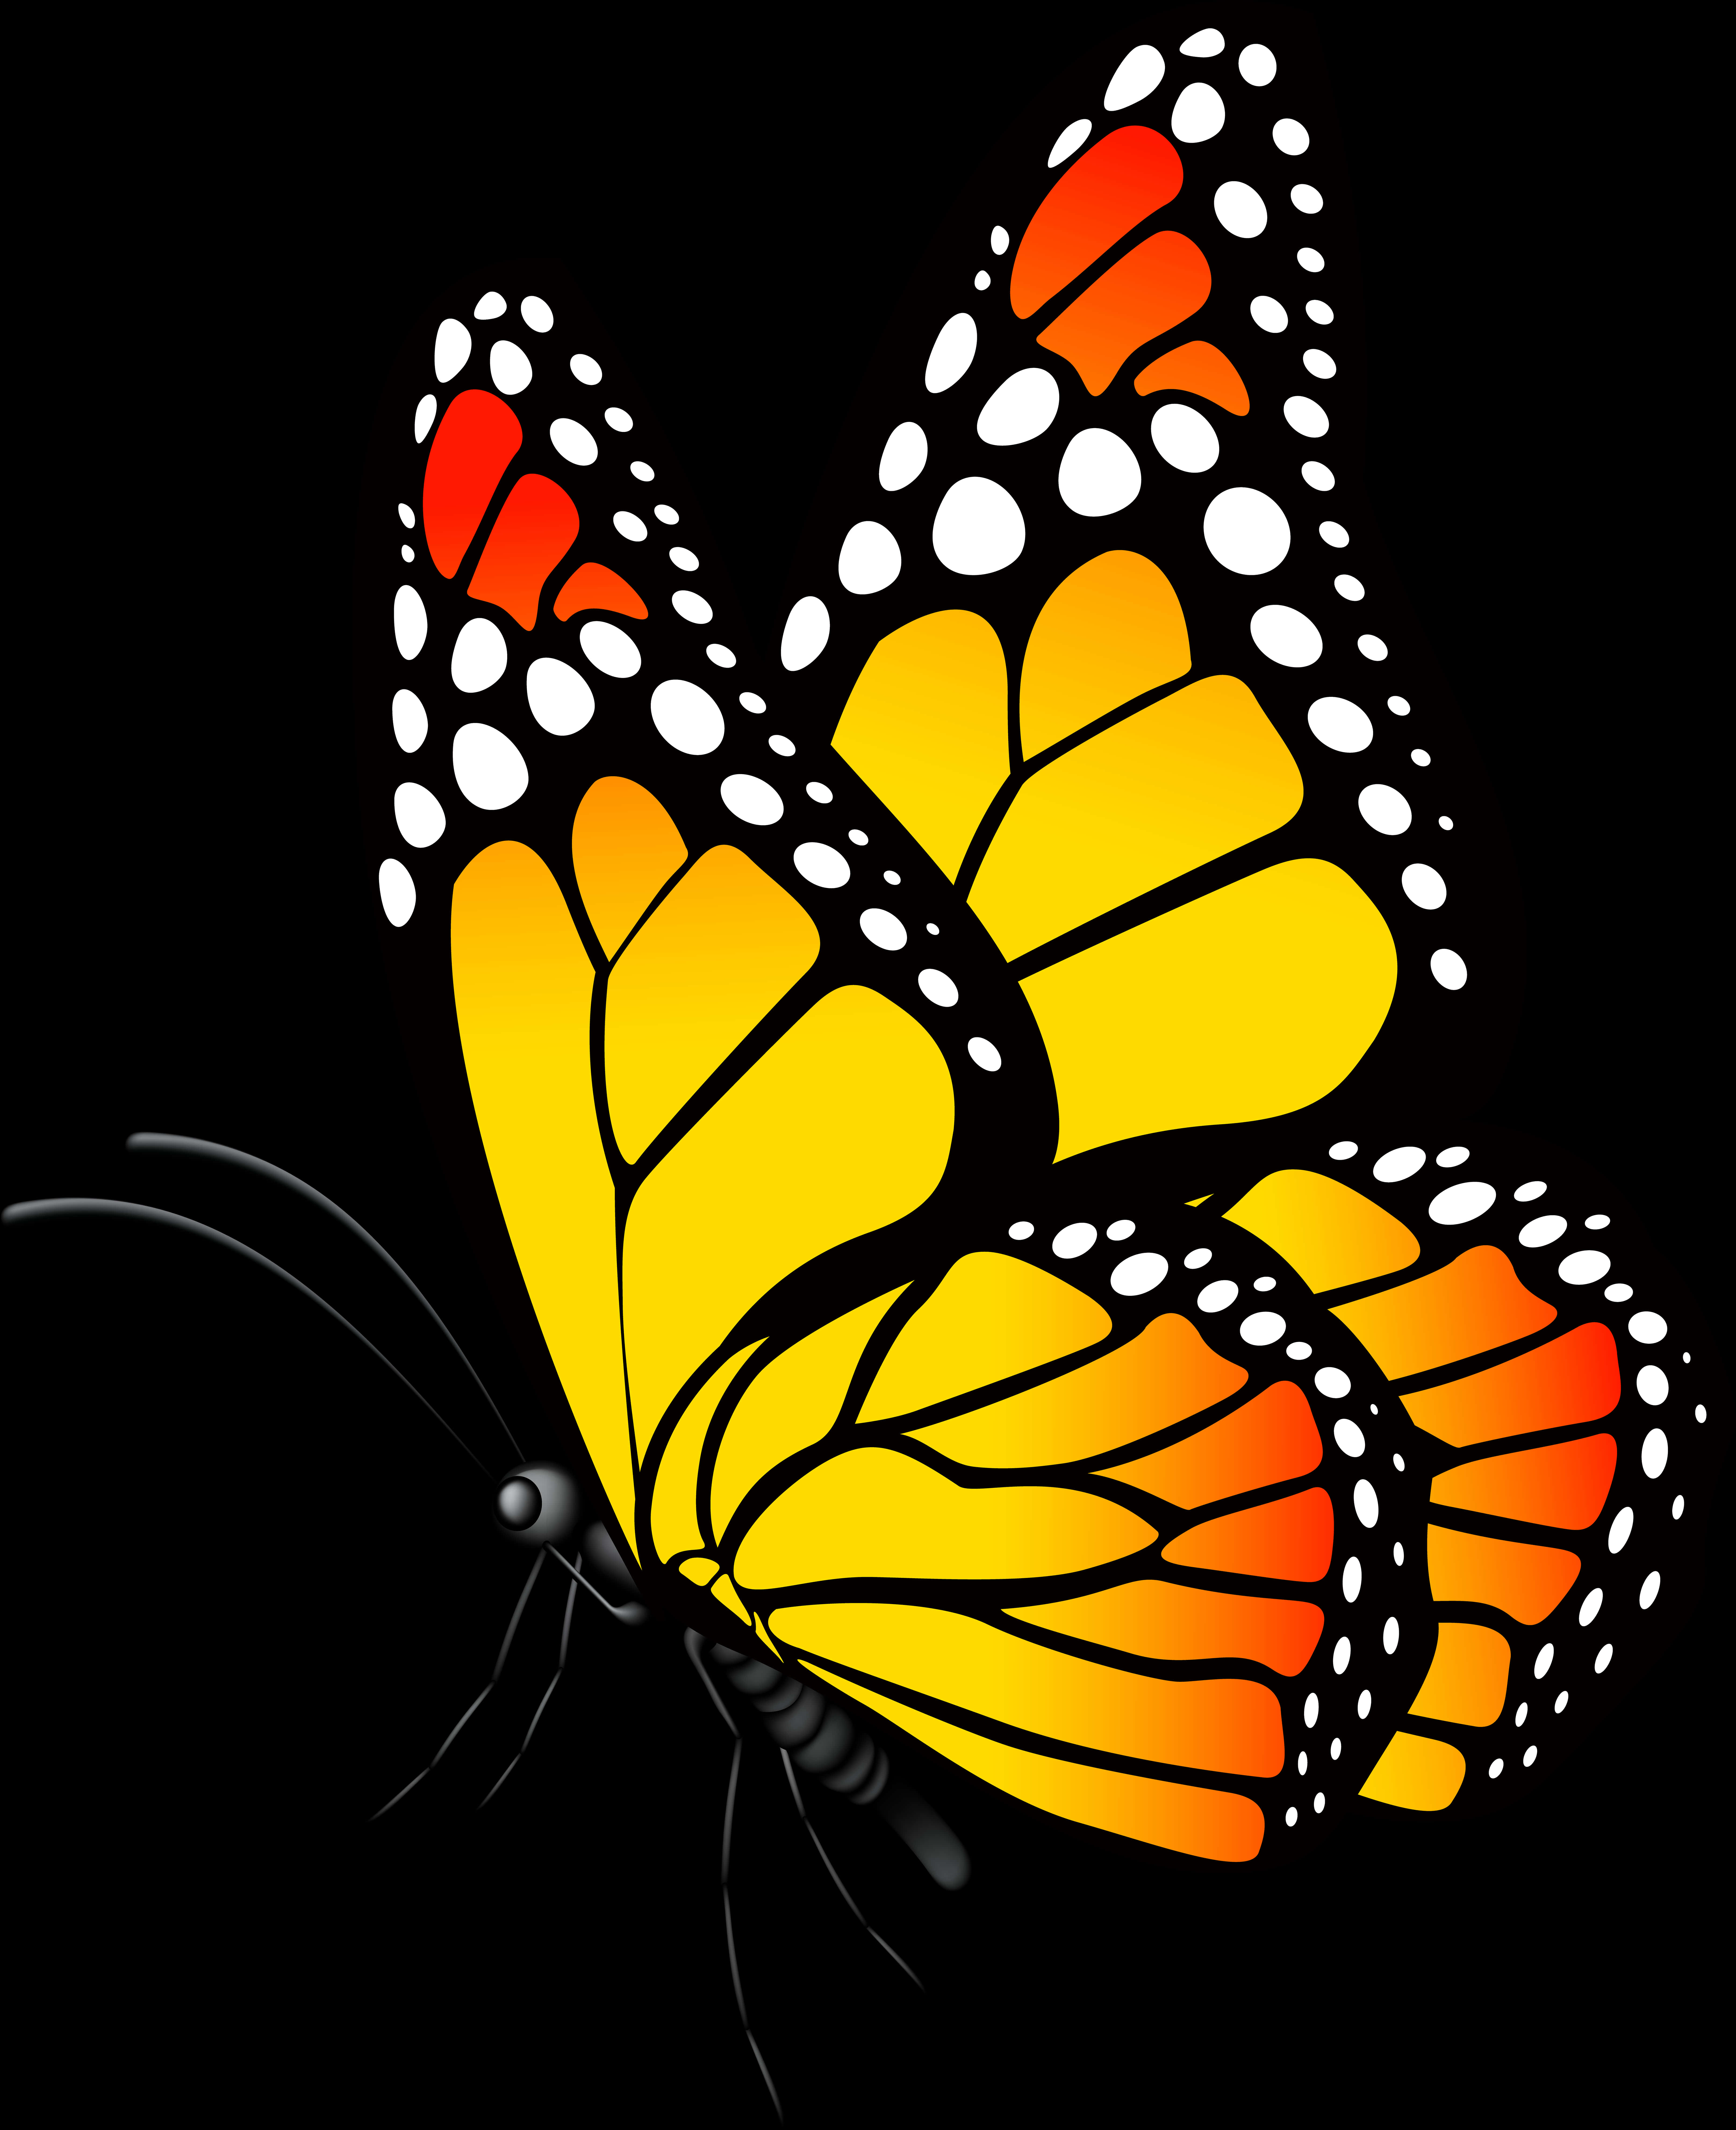 Vibrant Monarch Butterfly Illustration PNG